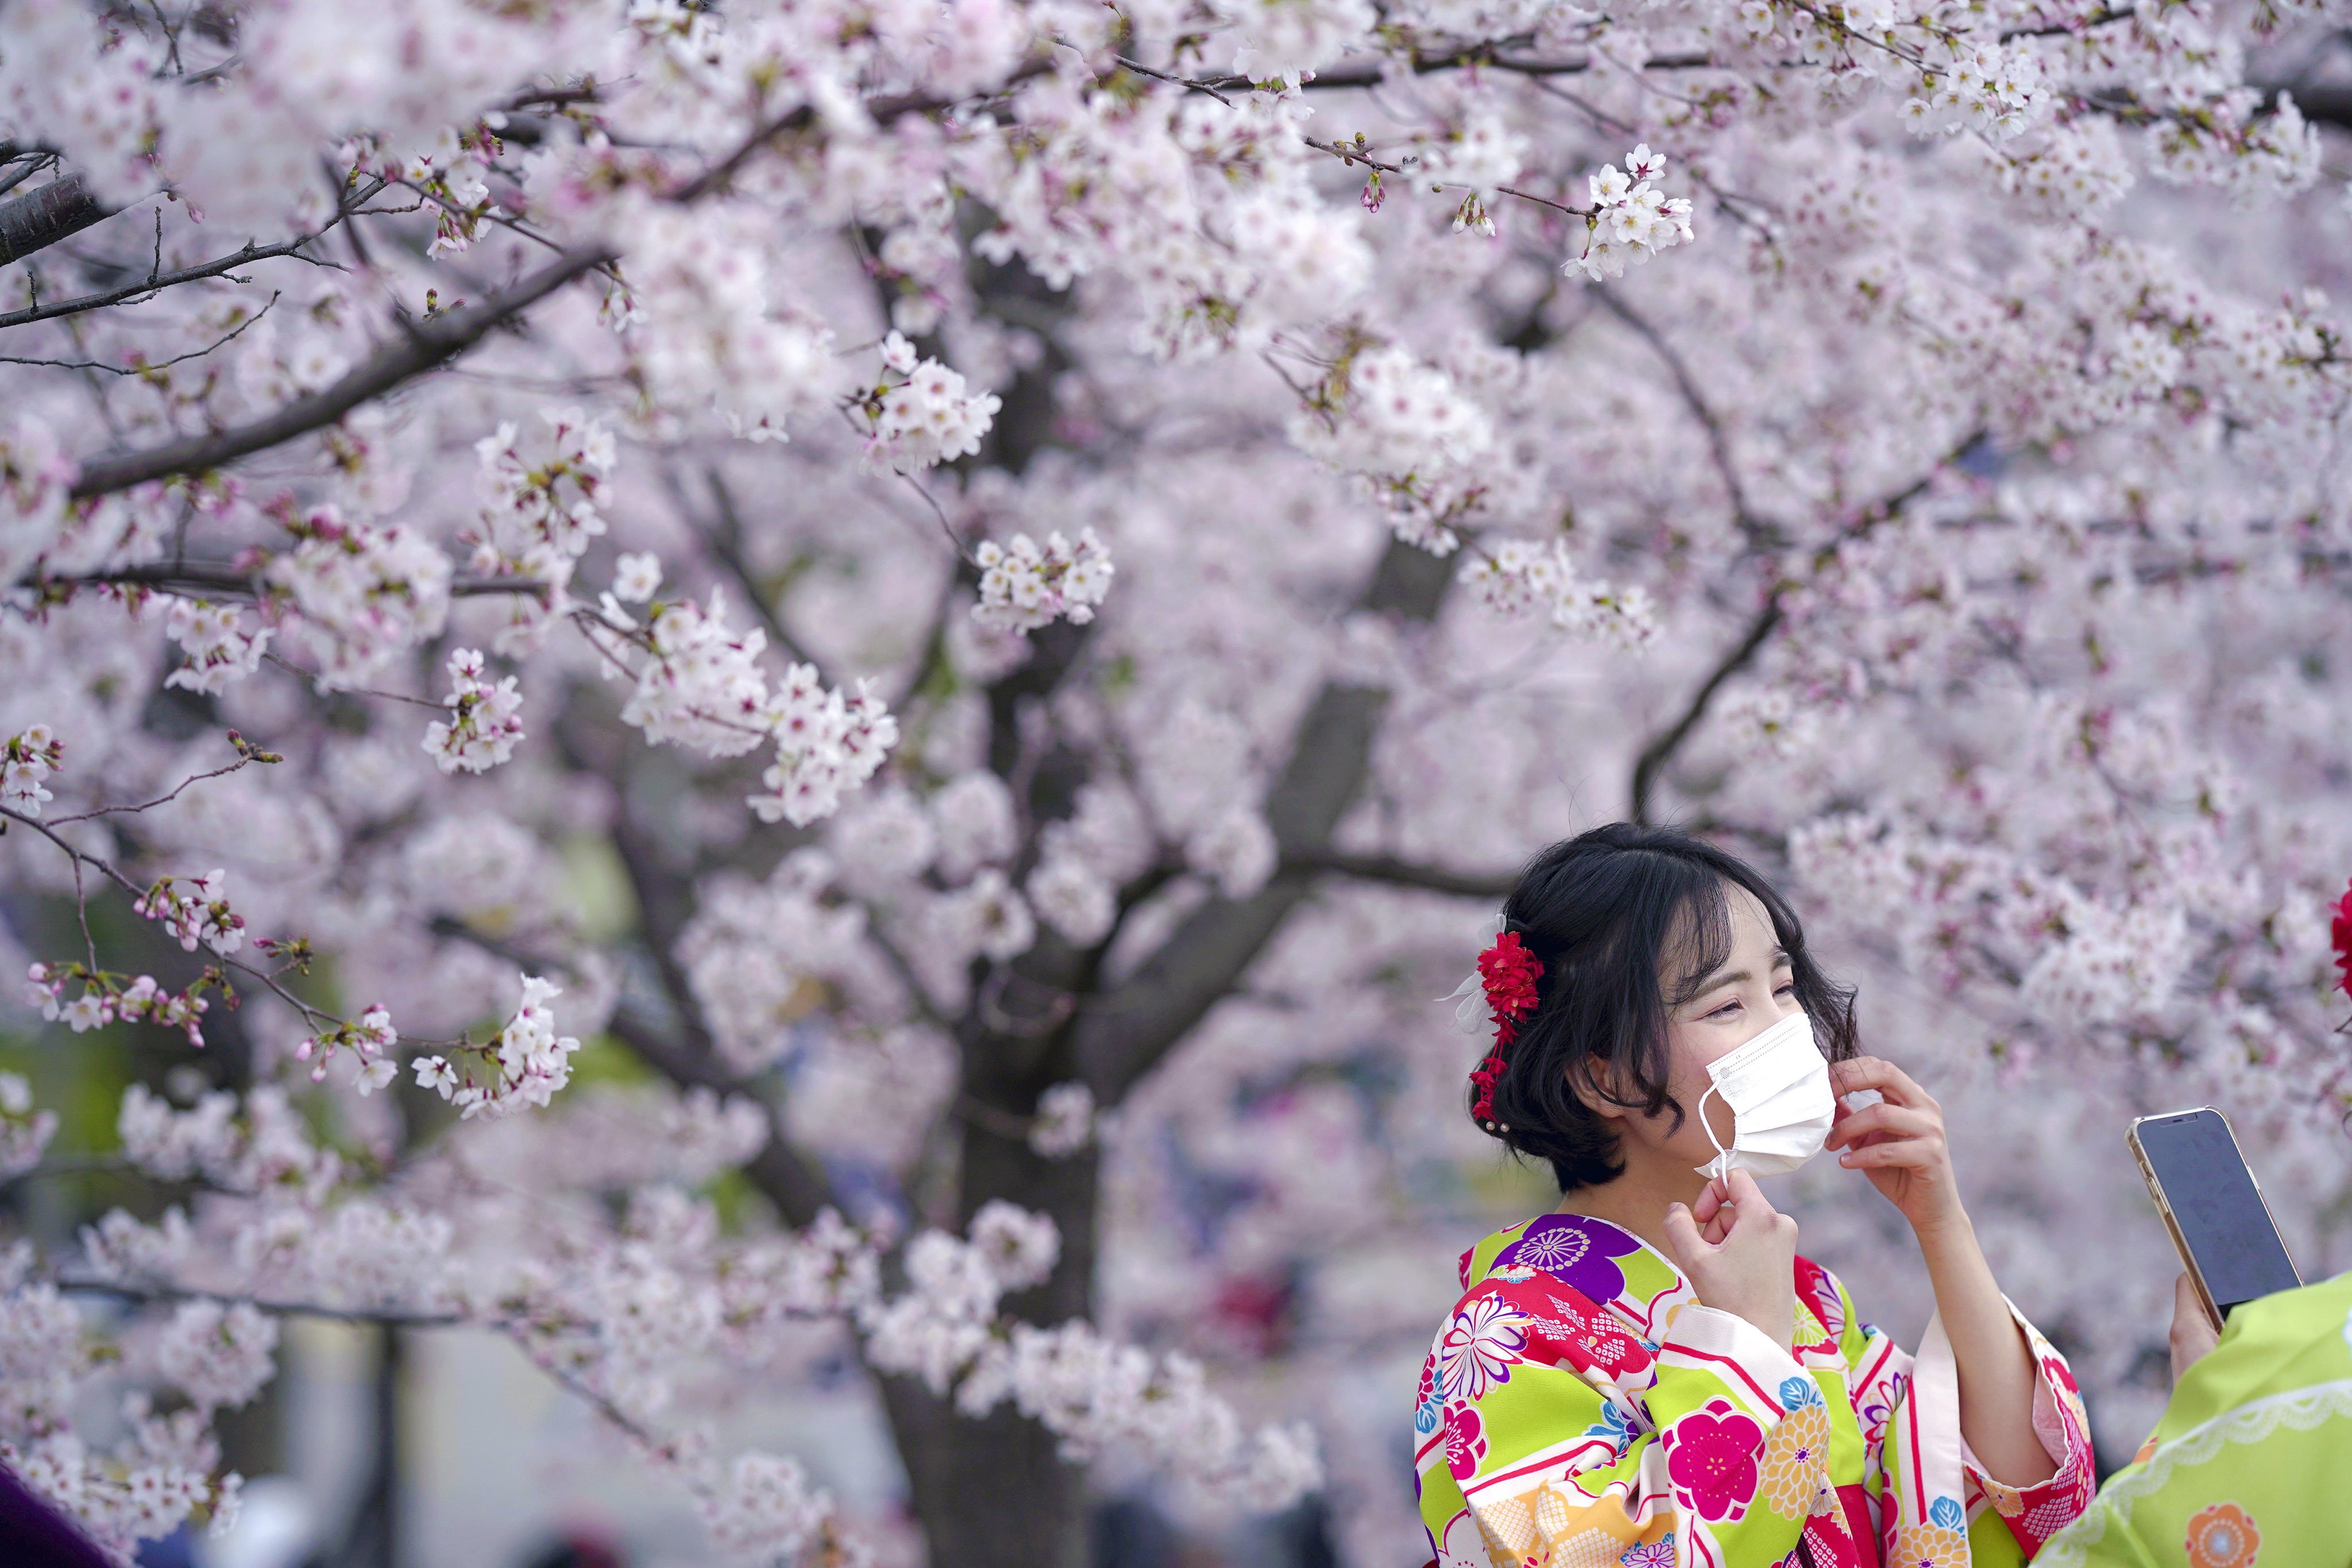 The early arrival of the cherry blossom season to Japan struck an optimistic chord as the country slowly reopens to foreign travellers. Photo: AP Photo